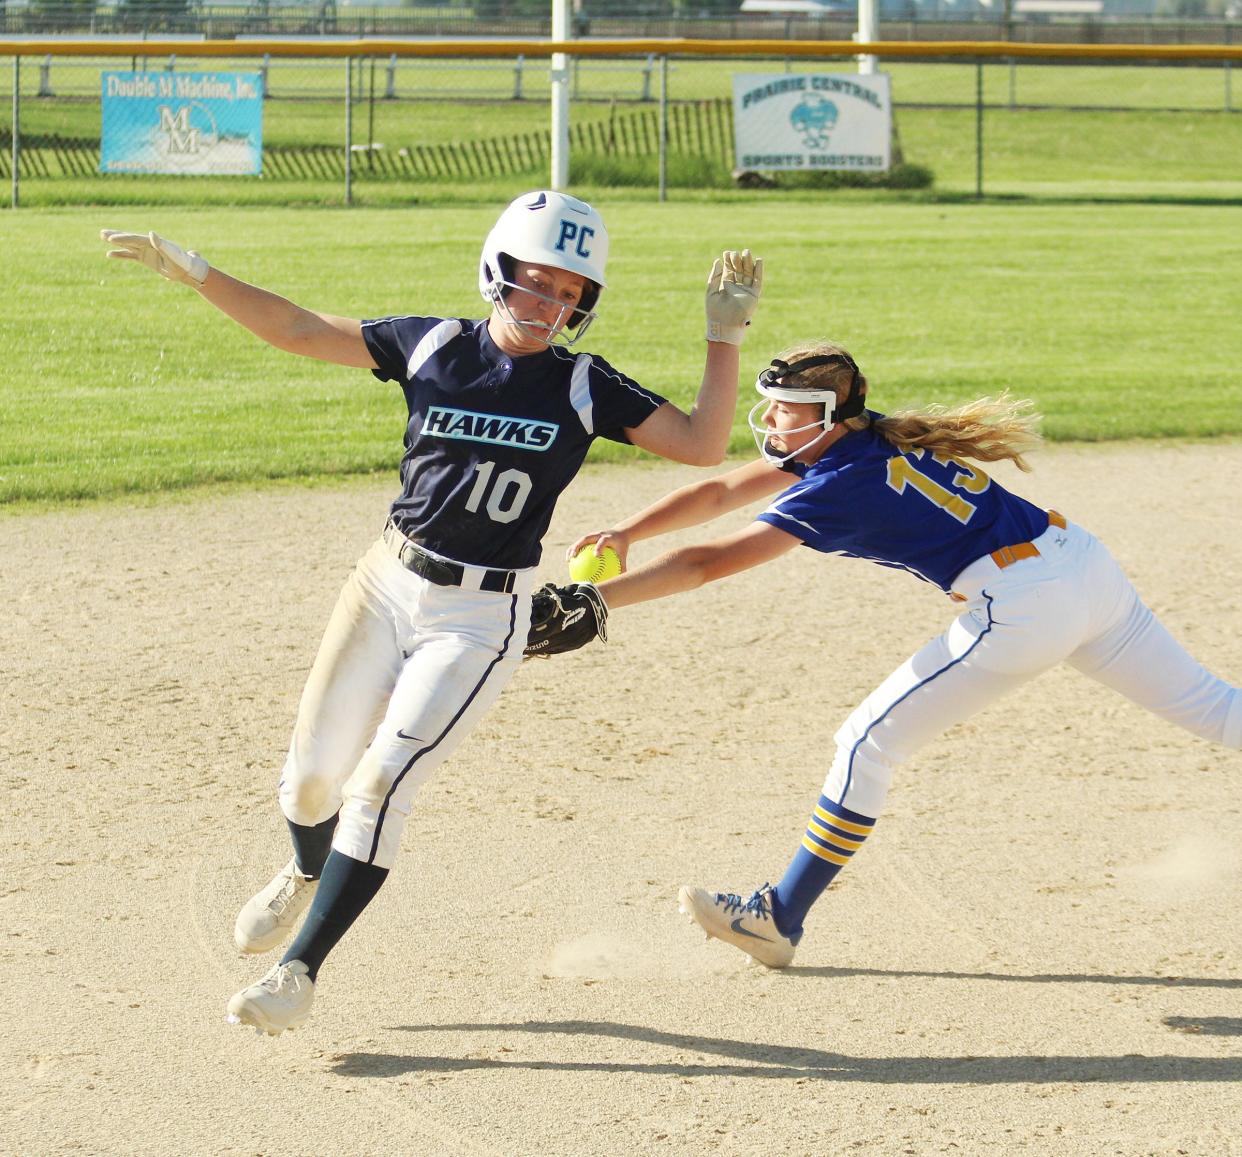 Prairie Central's Kenna Skaggs avoids being tagged as she races to third base Monday. Skaggs scored in the bottom of the seventh inning with the game's only run to send the Hawks to the regional semifinal round with a 1-0 win over Paxton-Buckley-Loda.